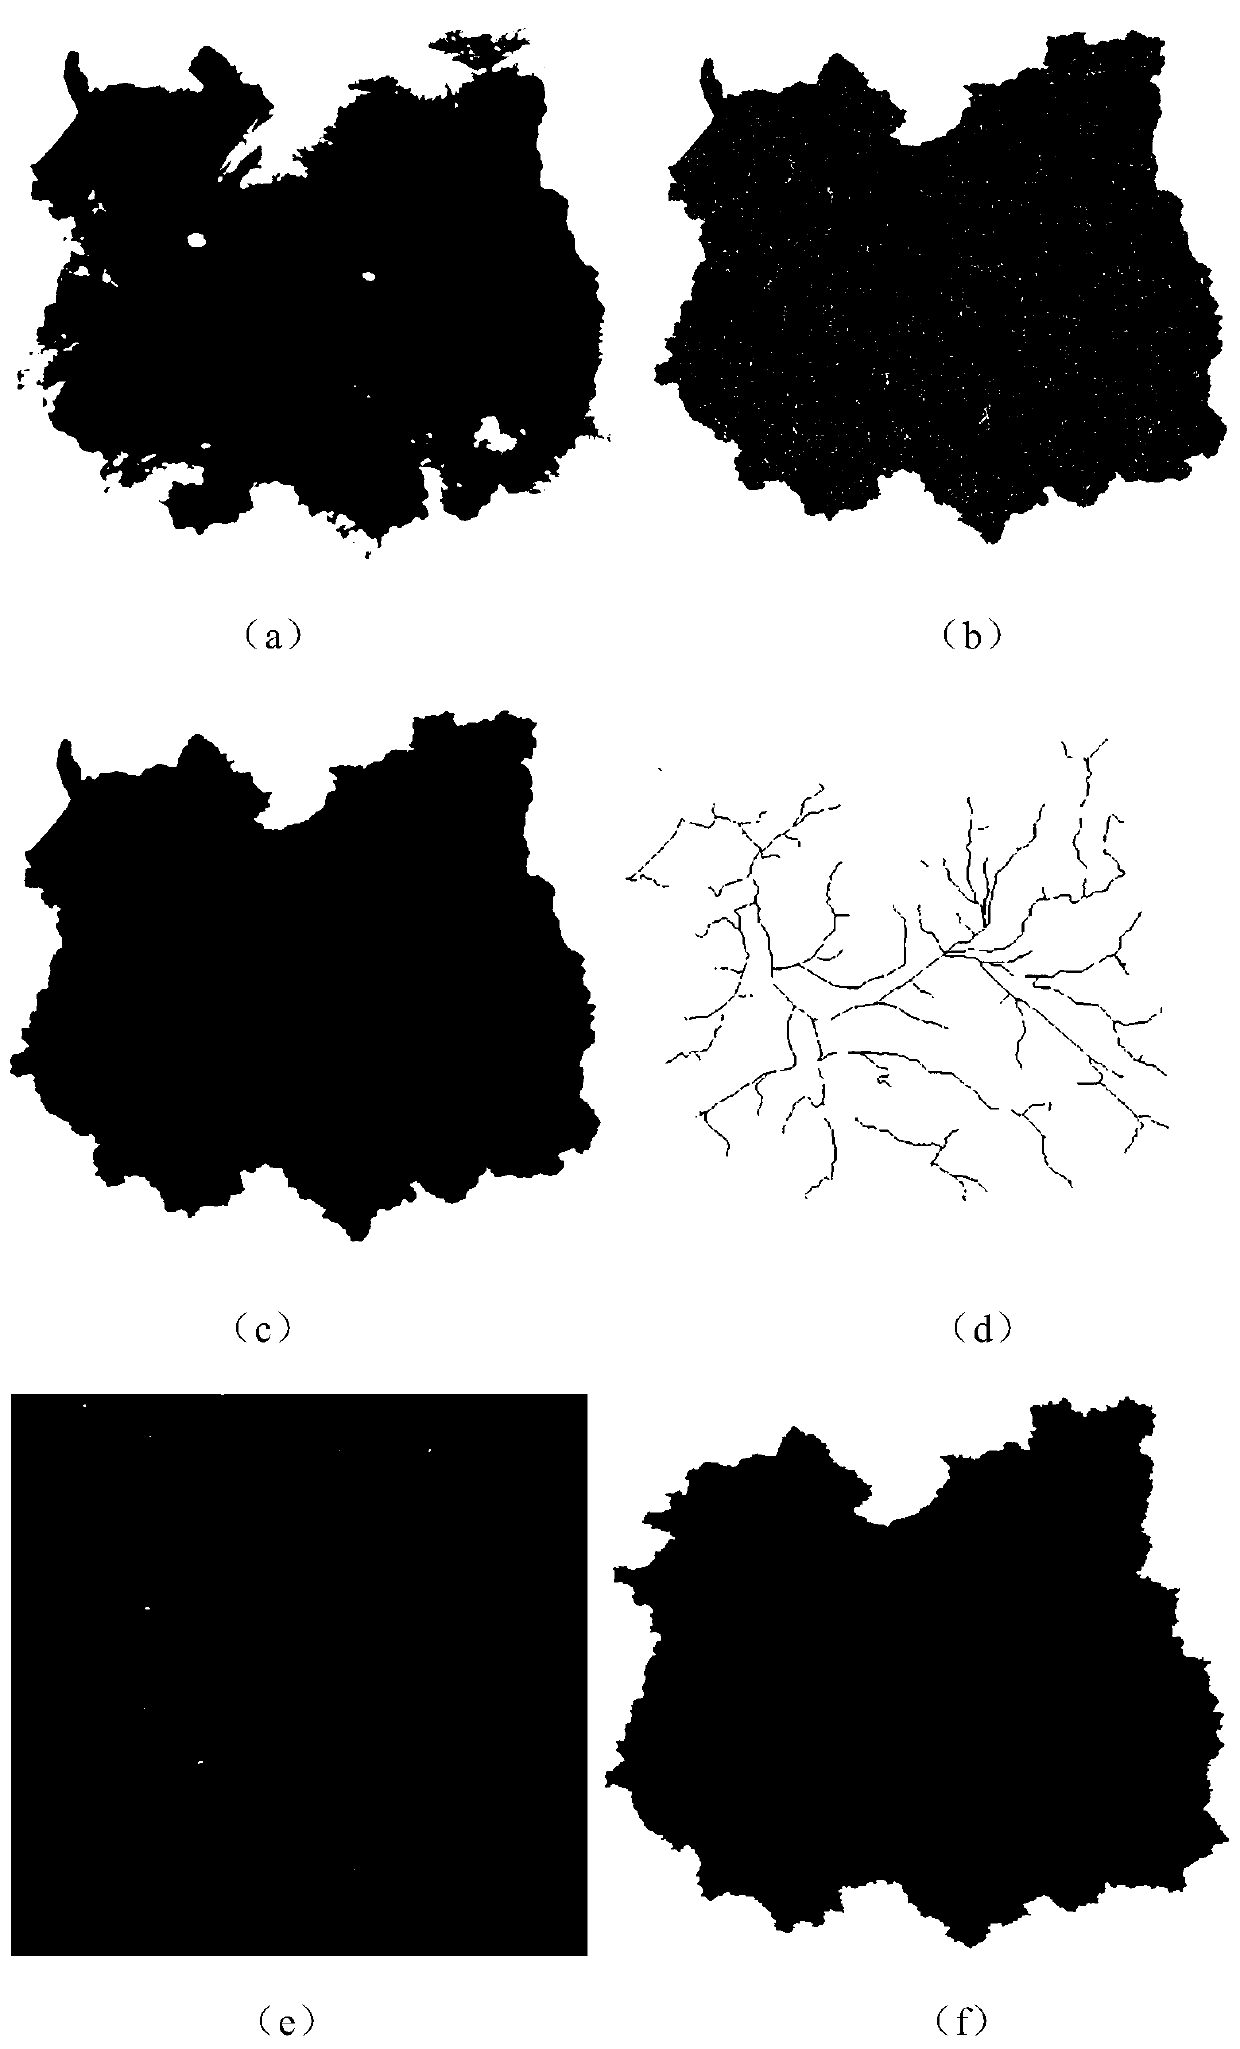 Calculation Method of Connectivity of River Network and Water System Based on Improved Graph Theory and Hydrological Simulation